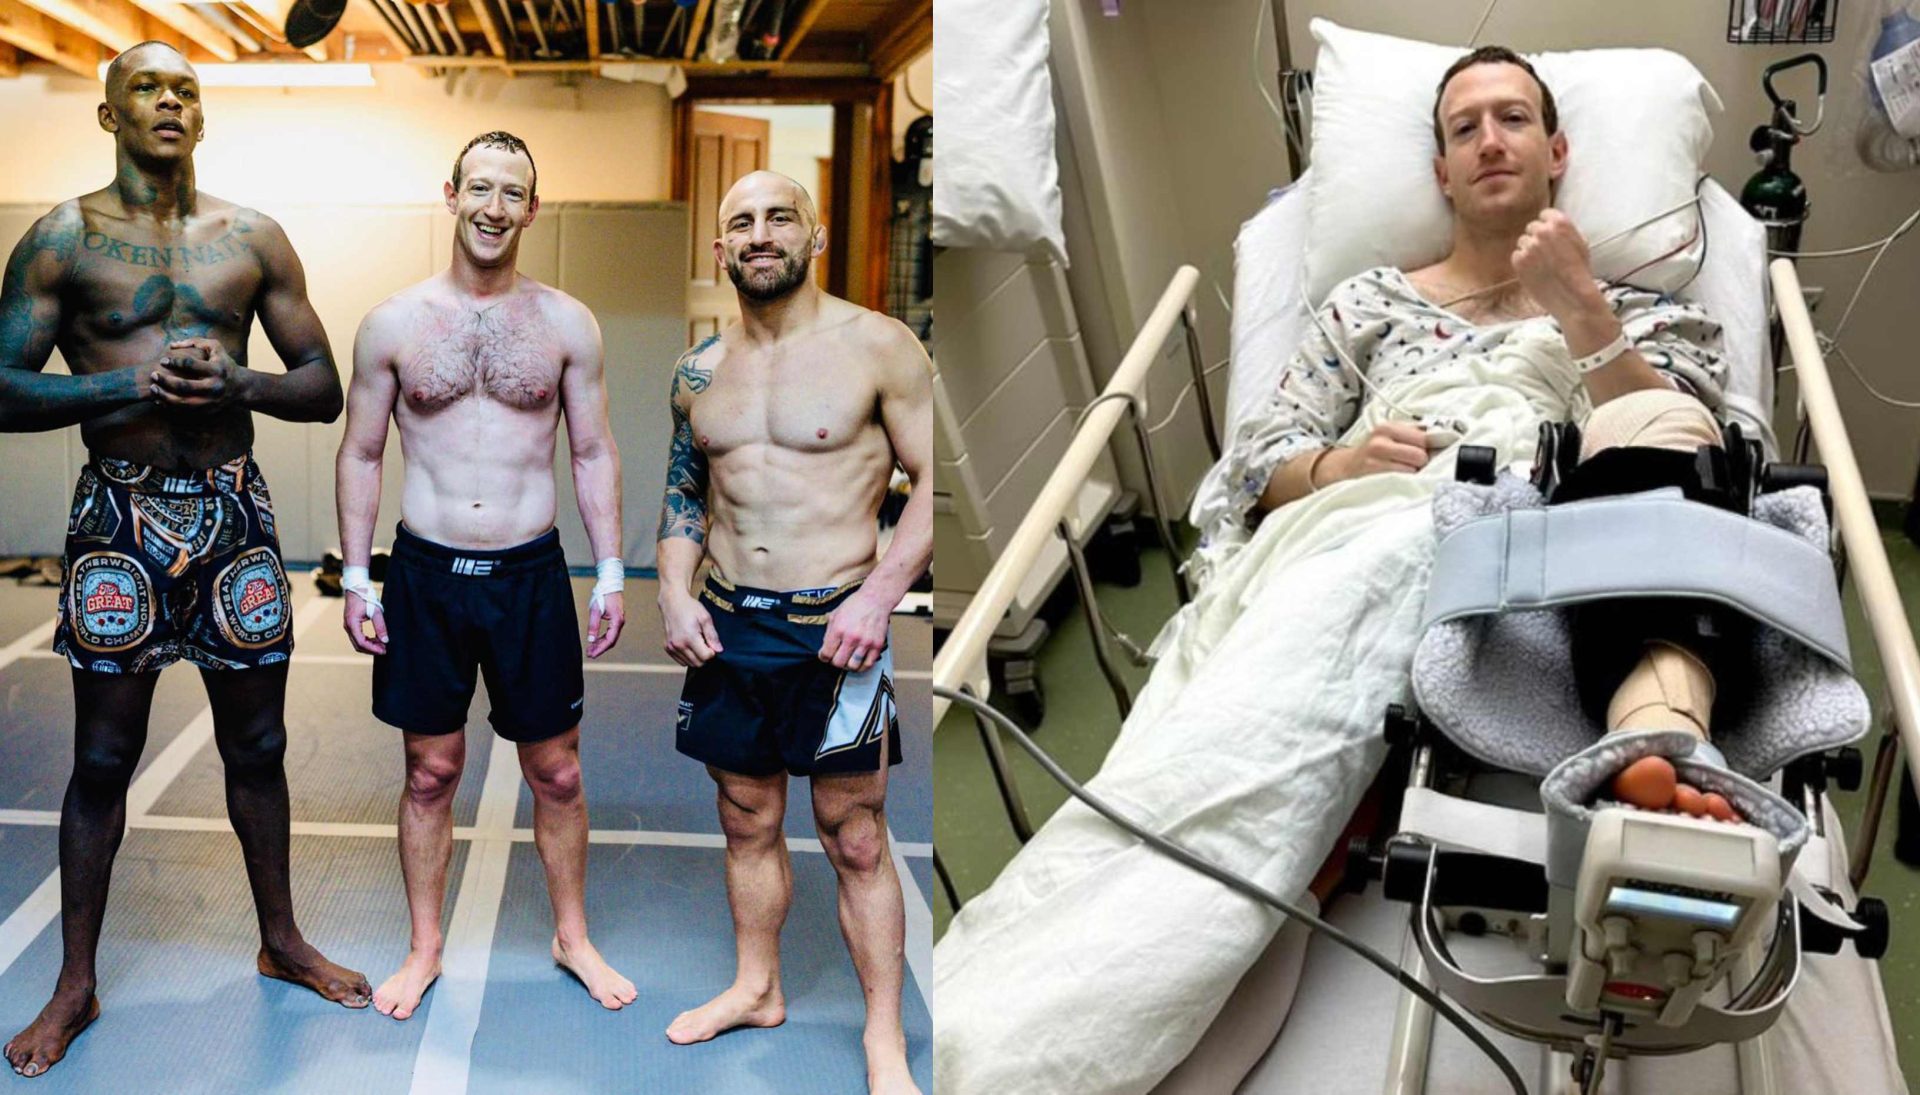 Mark Zuckerberg tears his ACL while training for MMA fight